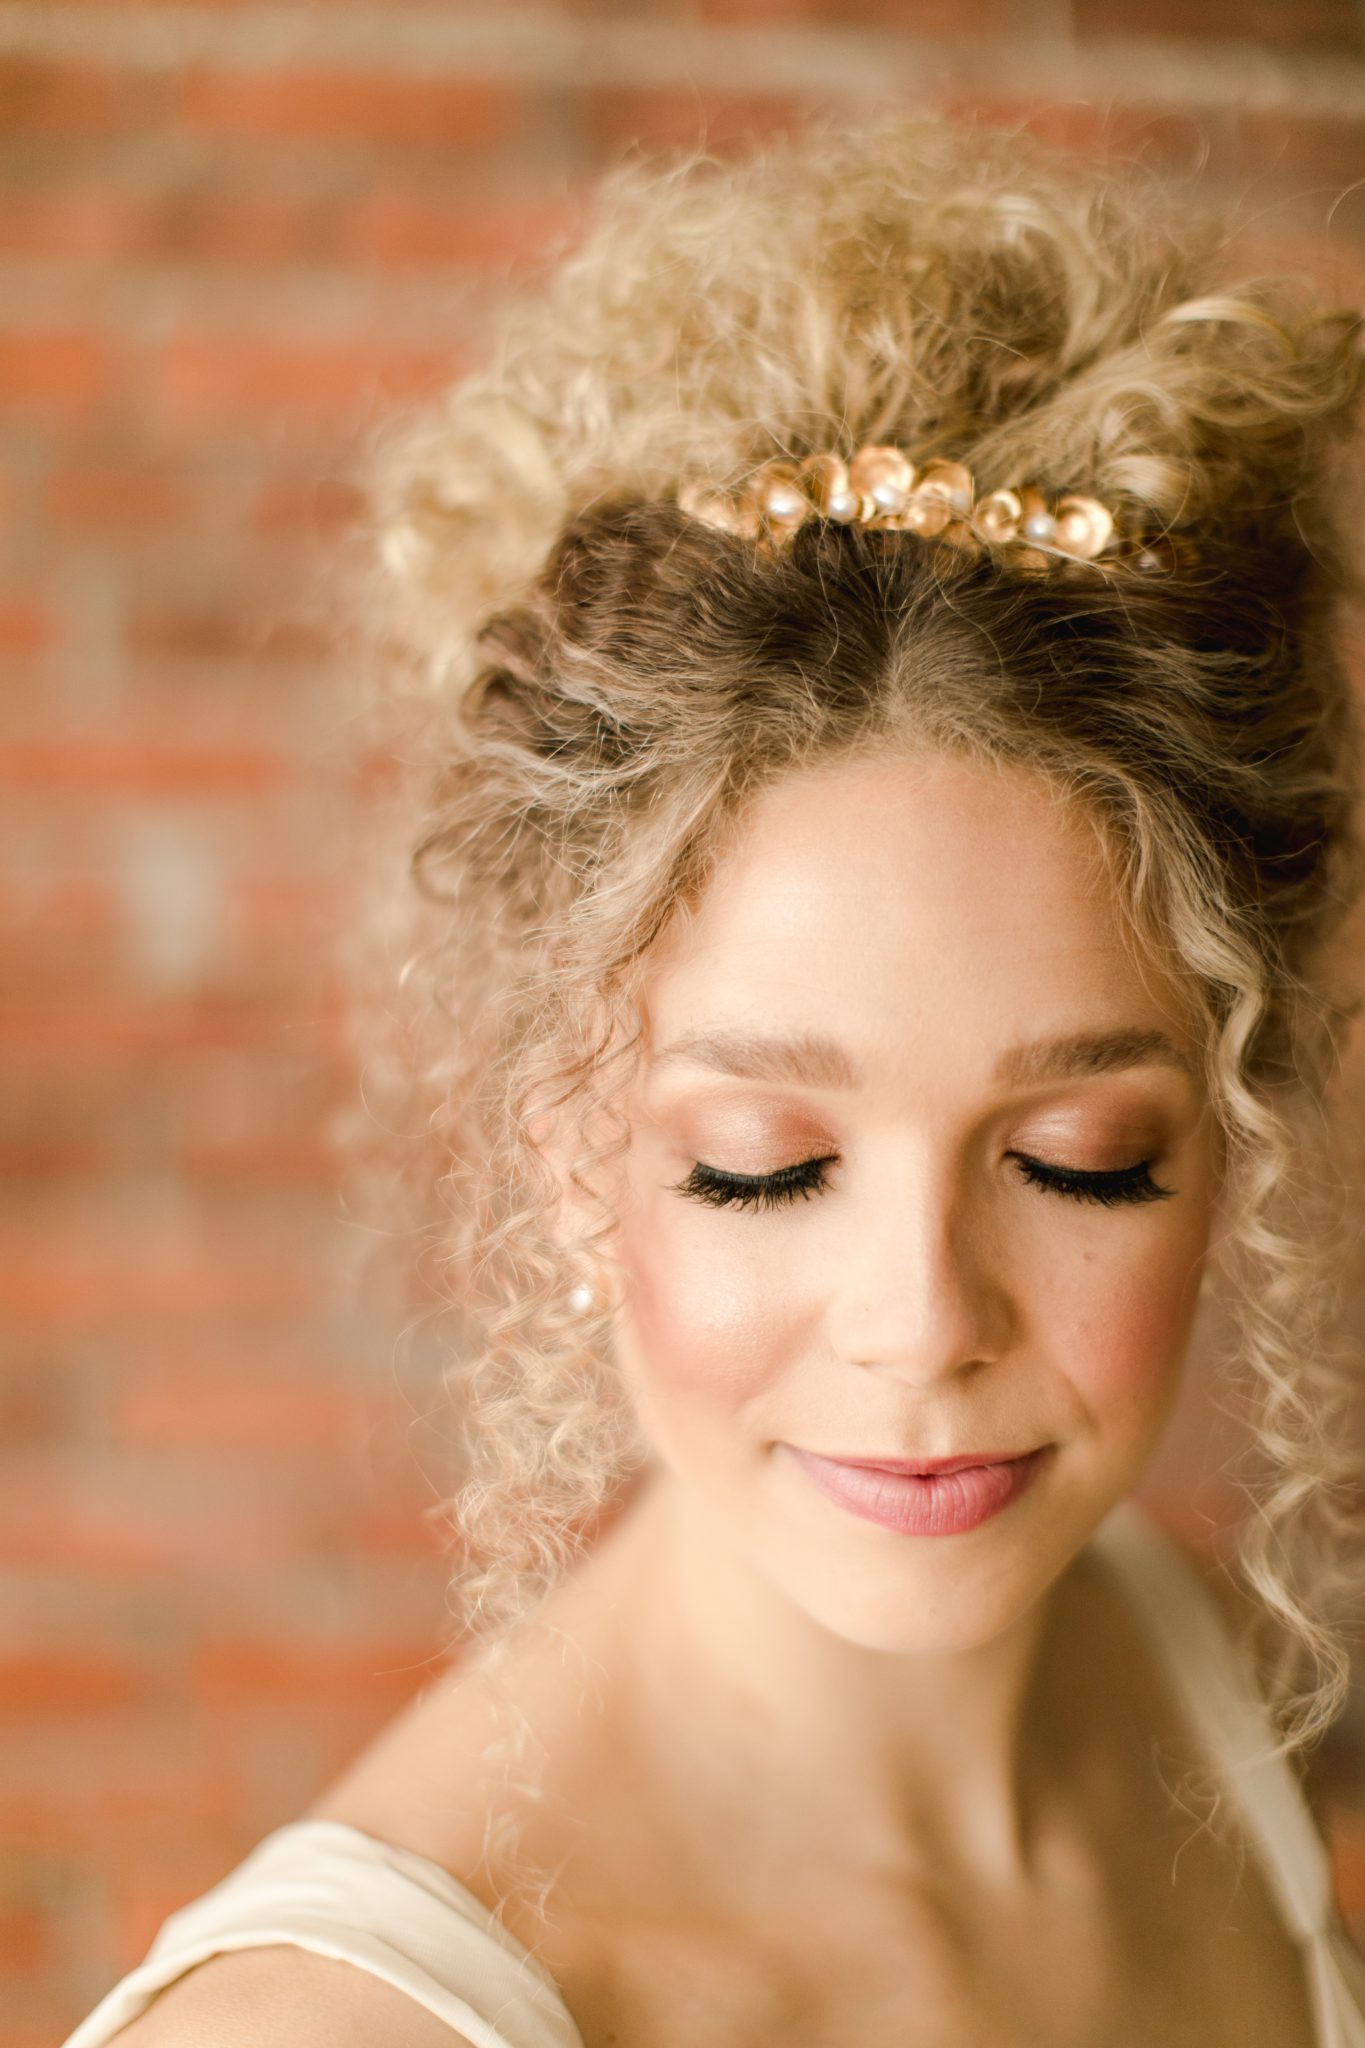 A beautiful headband made of stunning brass flowers with ivory freshwater pearls. This design can be worn in the front or the back and adds an organic yet bold statement to your bridal look.